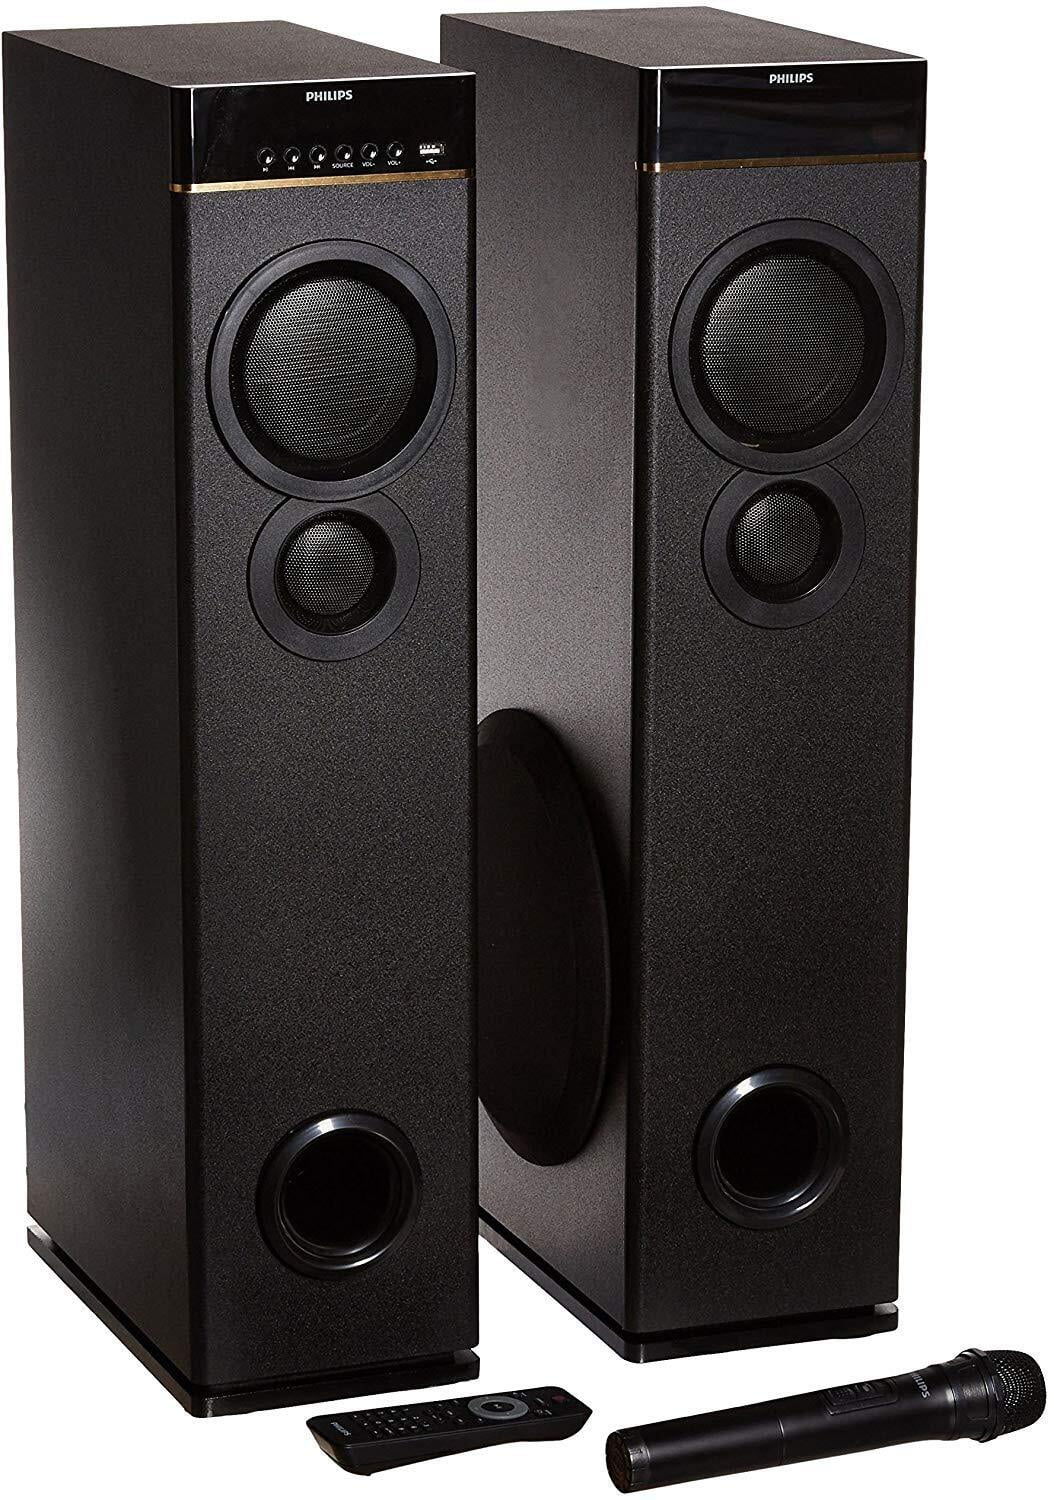 Philips SPA9080B Multimedia Tower Speakers on Dillimall.Com